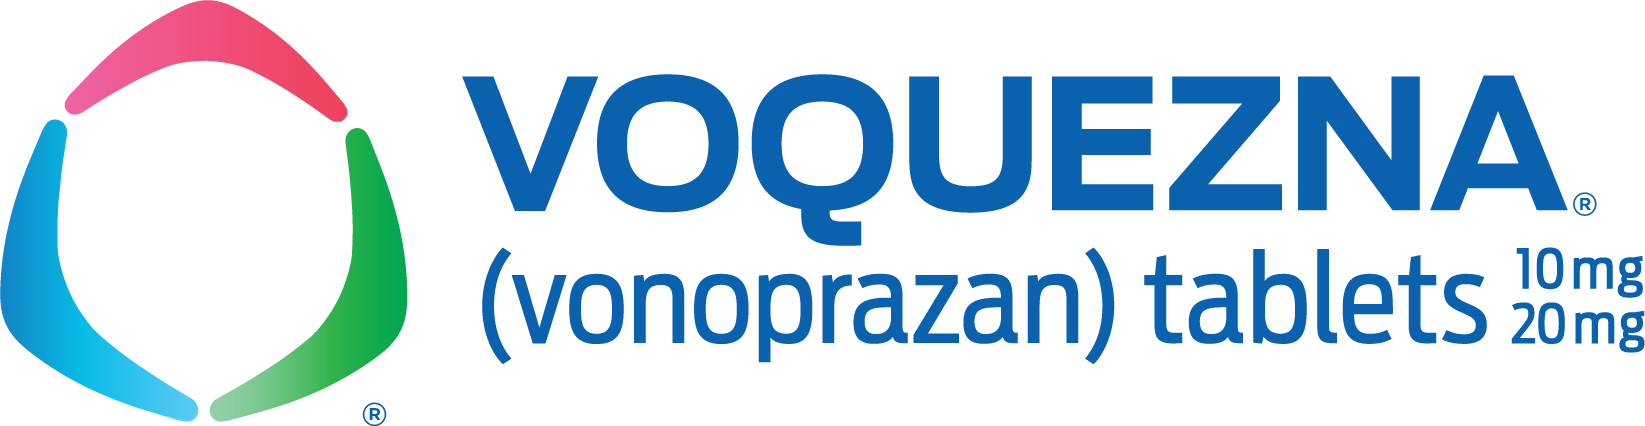  Express Scripts Adds Voquezna to Formulary for Gastroesophageal Reflux